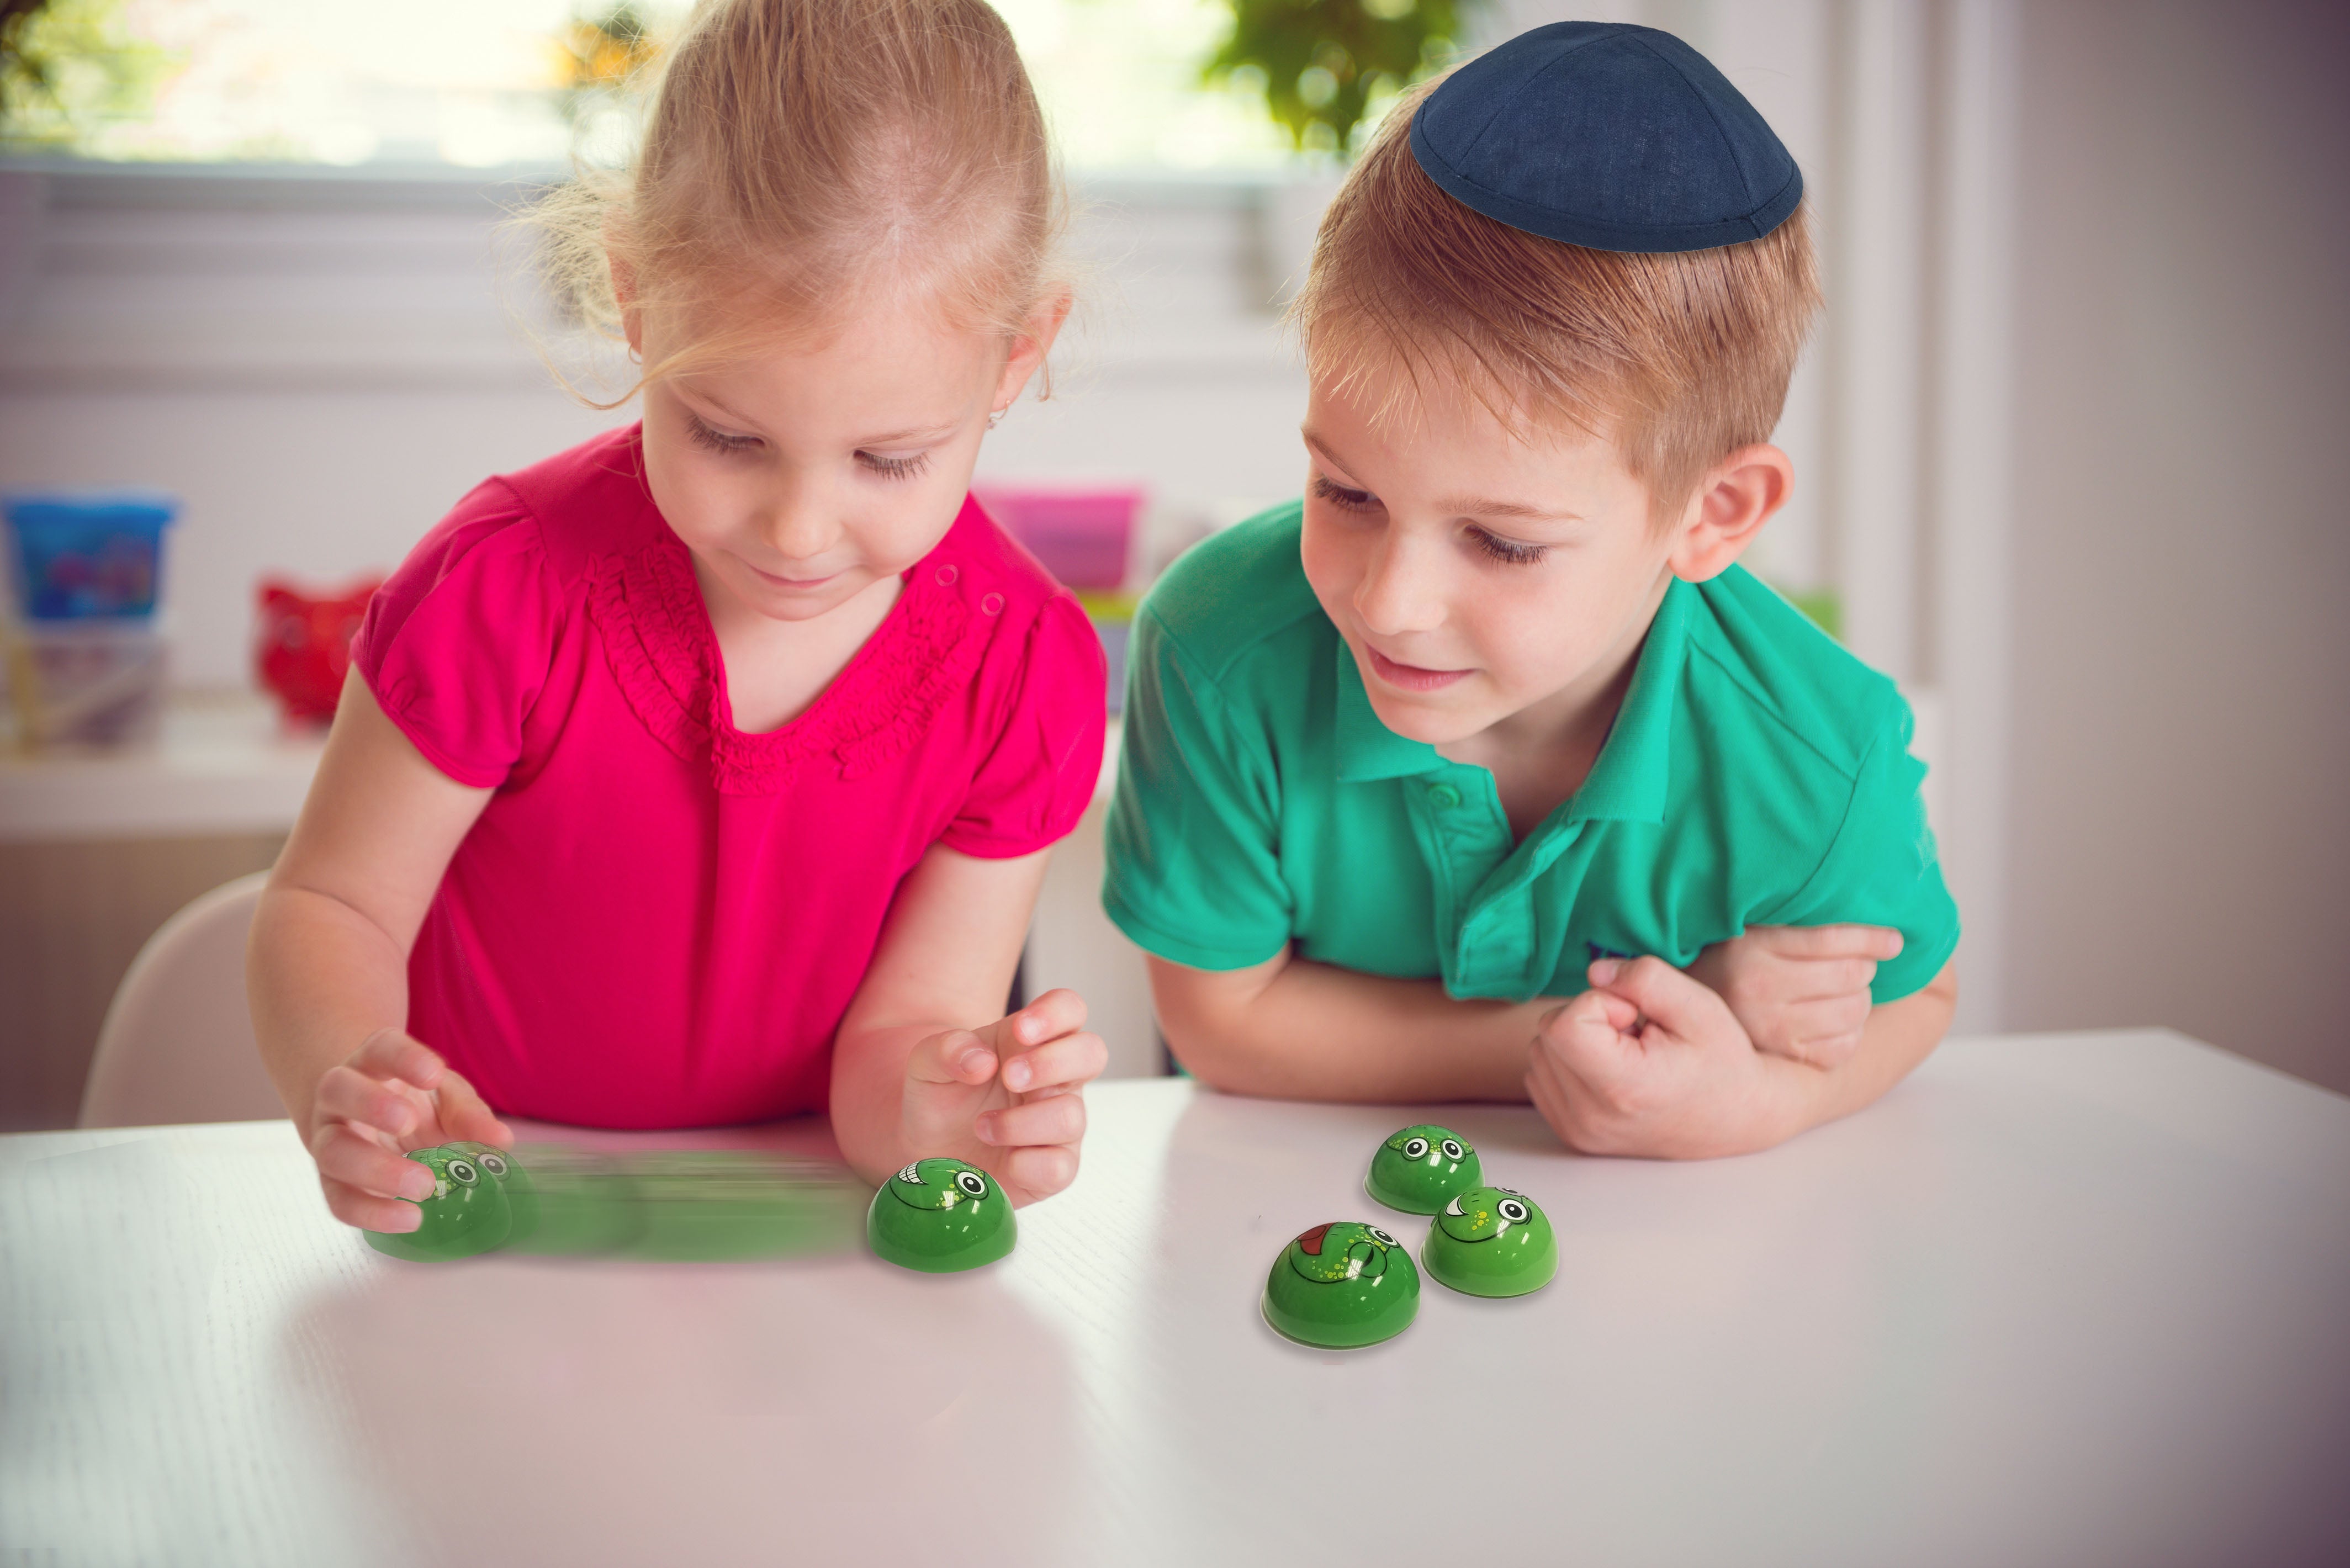 Passover Frantic Frogs Toy